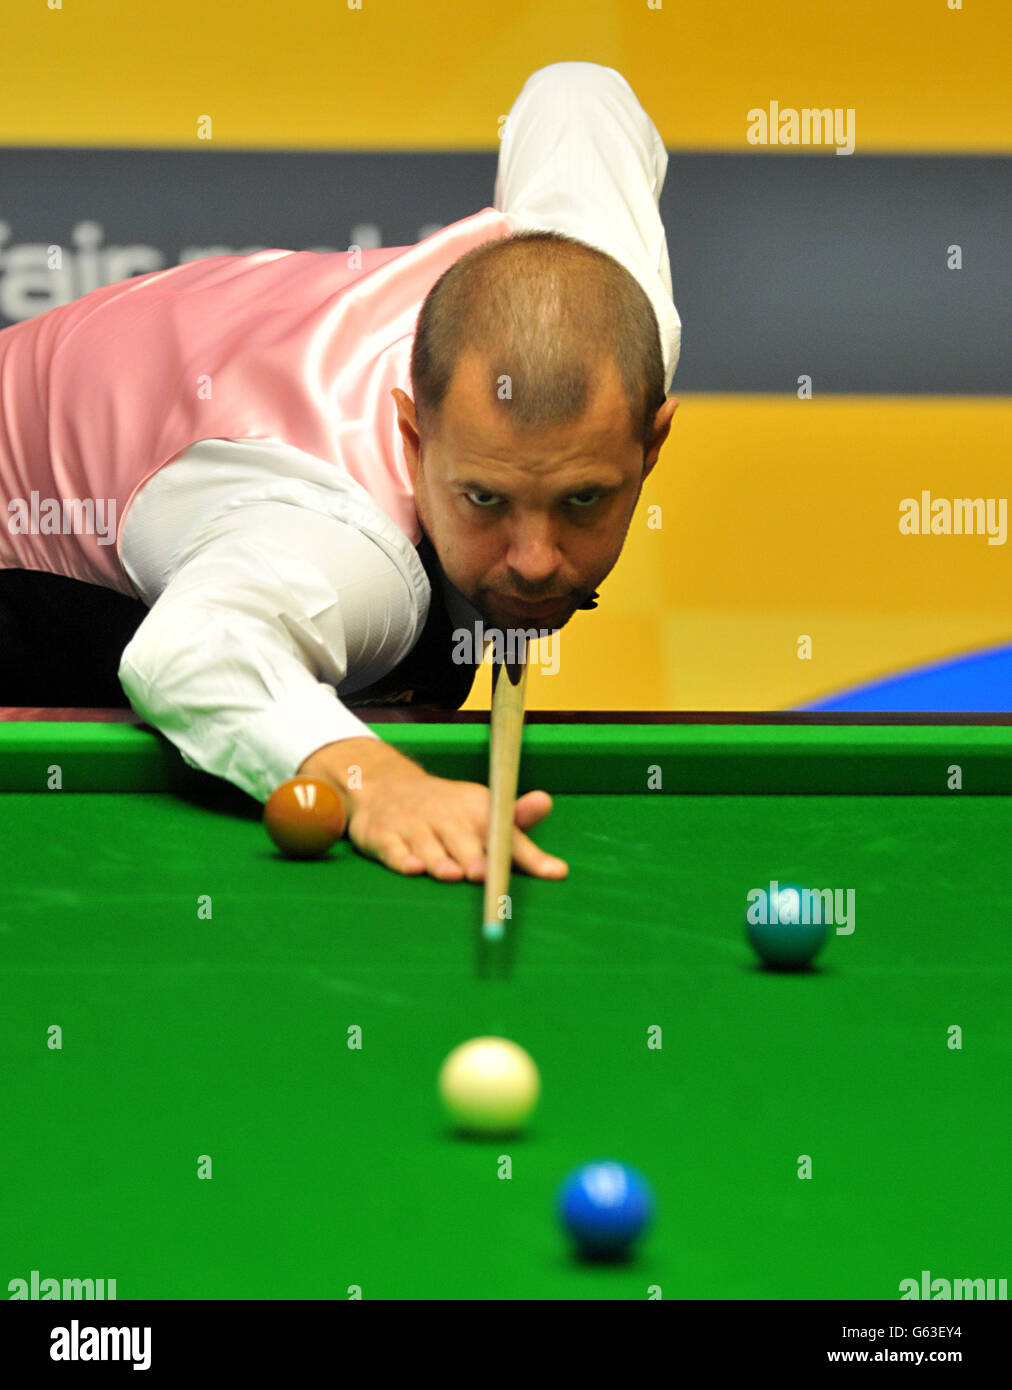 Barry Hawkins in action during his quarter final match against Ding Junhui during the Betfair World Championships at the Crucible, Sheffield. Stock Photo